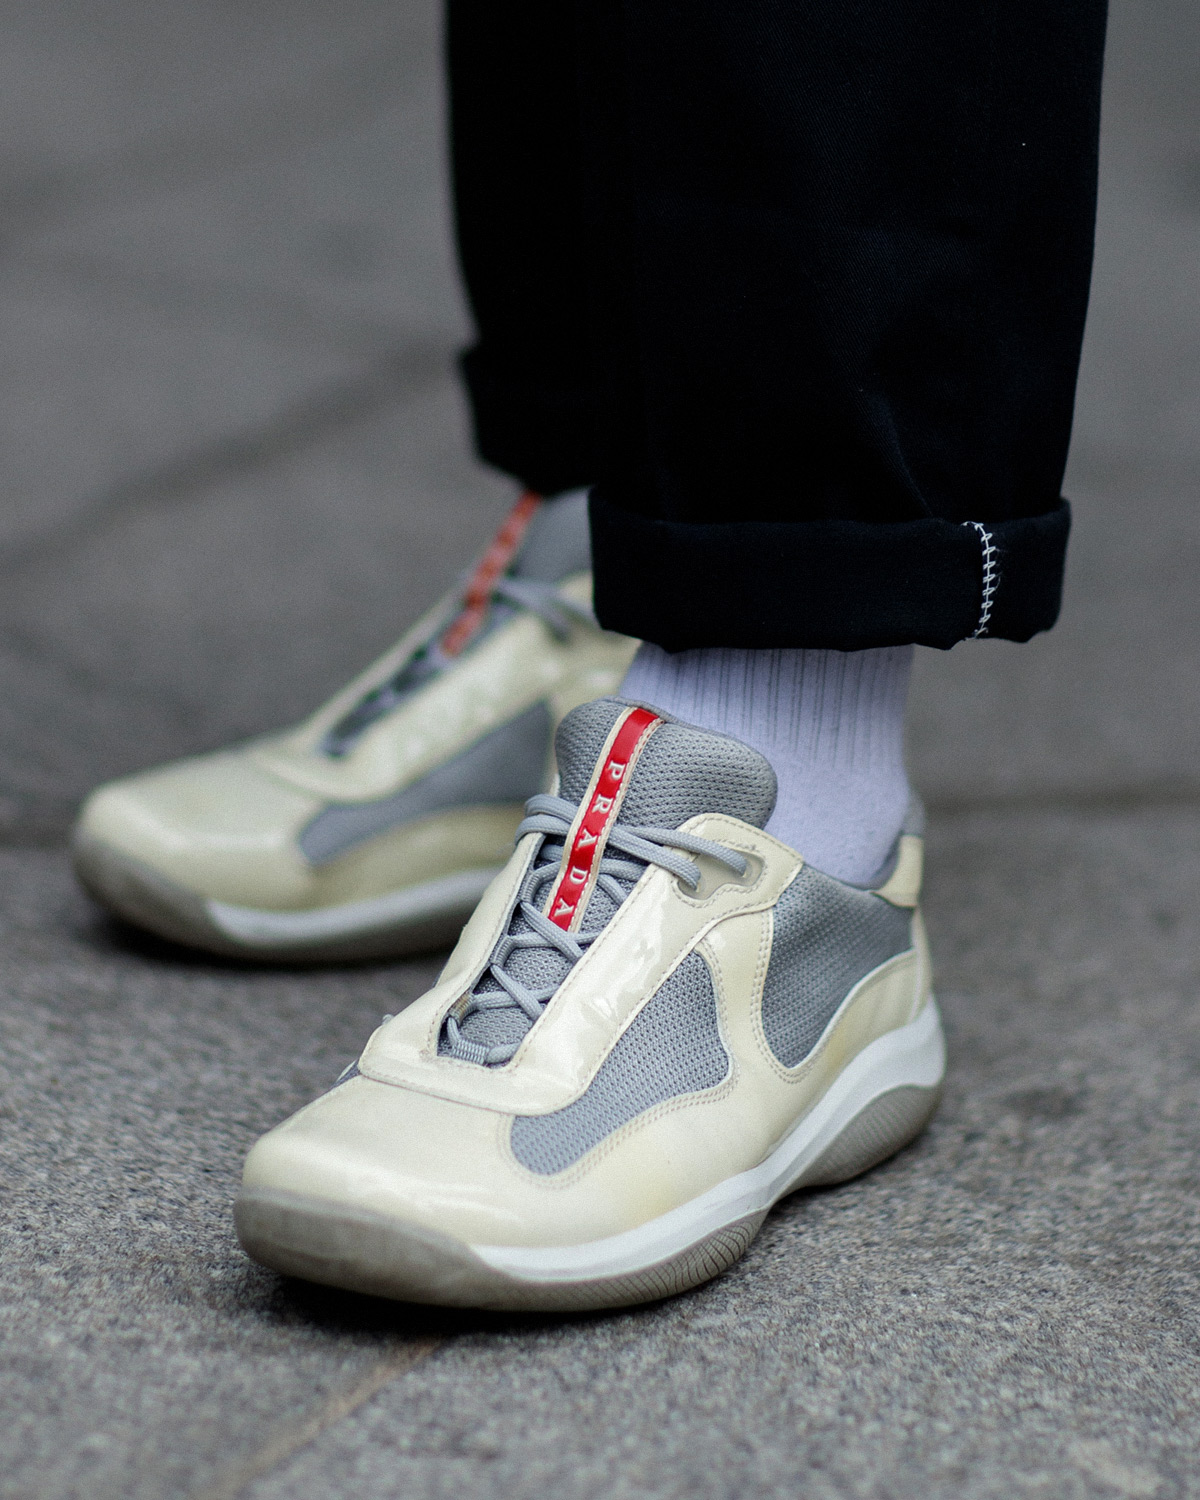 A person wearing Prada America’s Cup Original Sneakers in white with a grey and red detailing